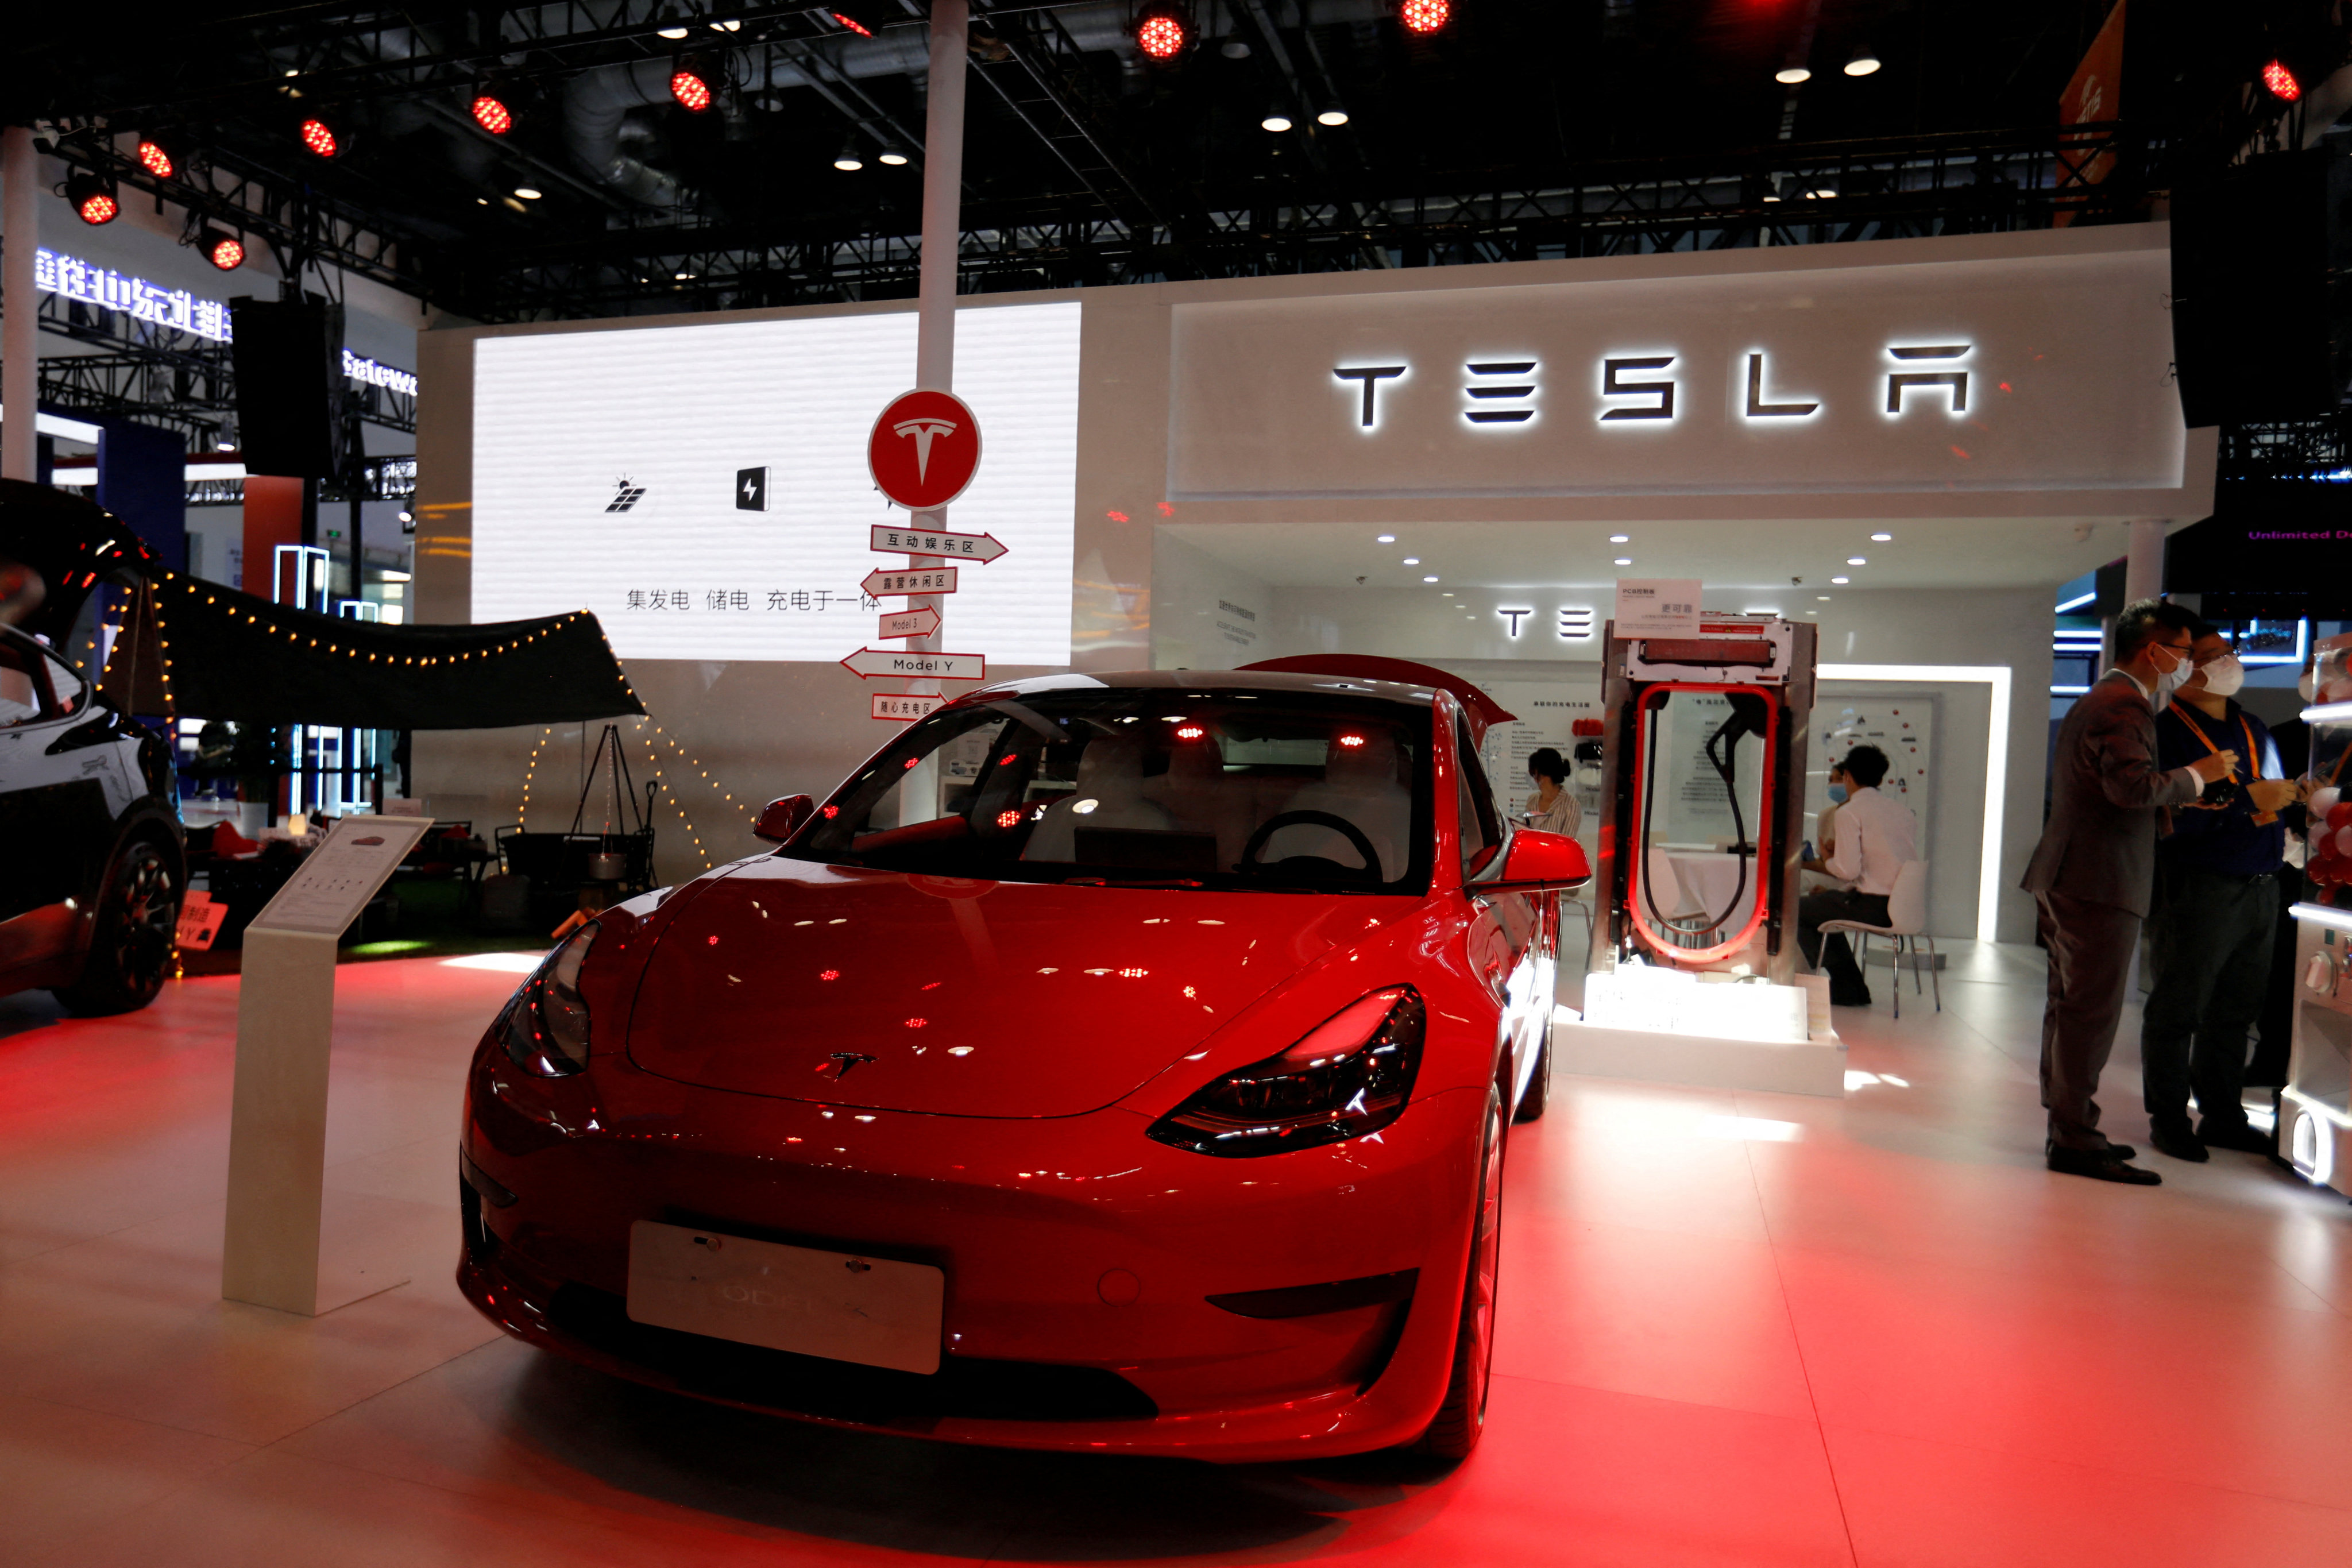 A Tesla Model 3 electric vehicle (EV) is displayed at the China International Fair for Trade in Services (CIFTIS) in Beijing, China on September 1. Photo: Reuters